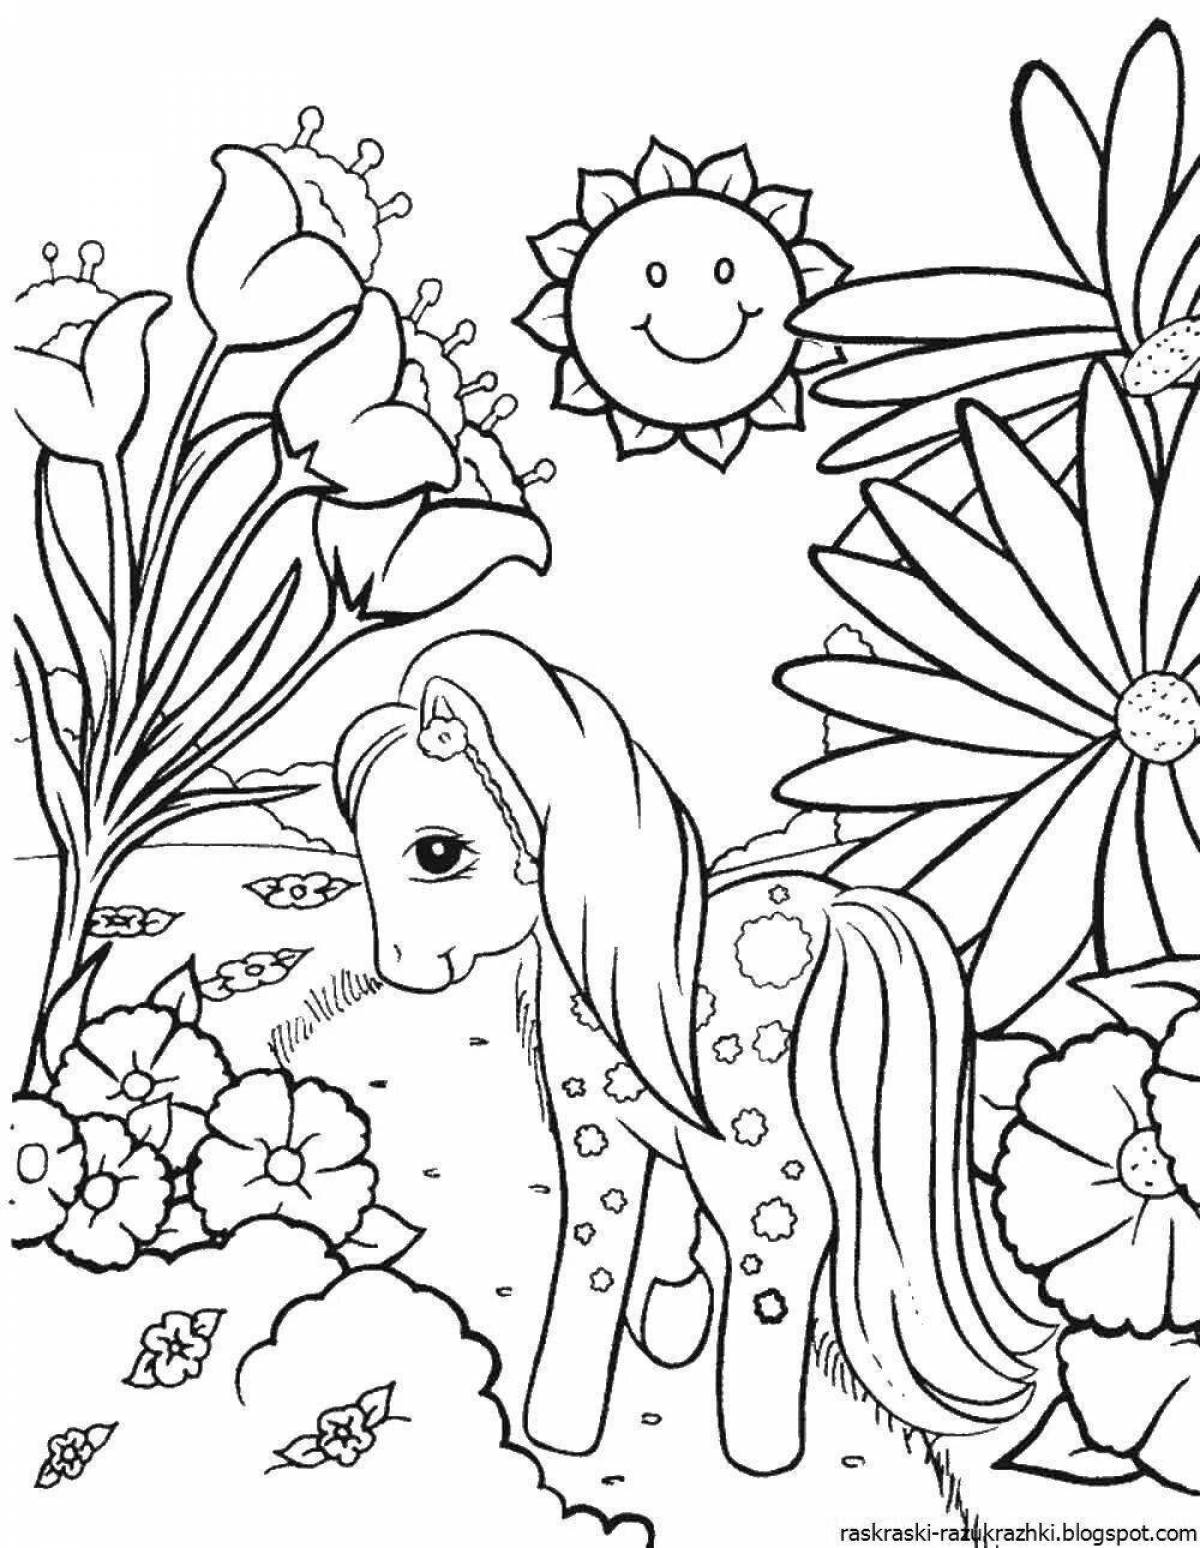 Amazing nature coloring book for 7-8 year olds